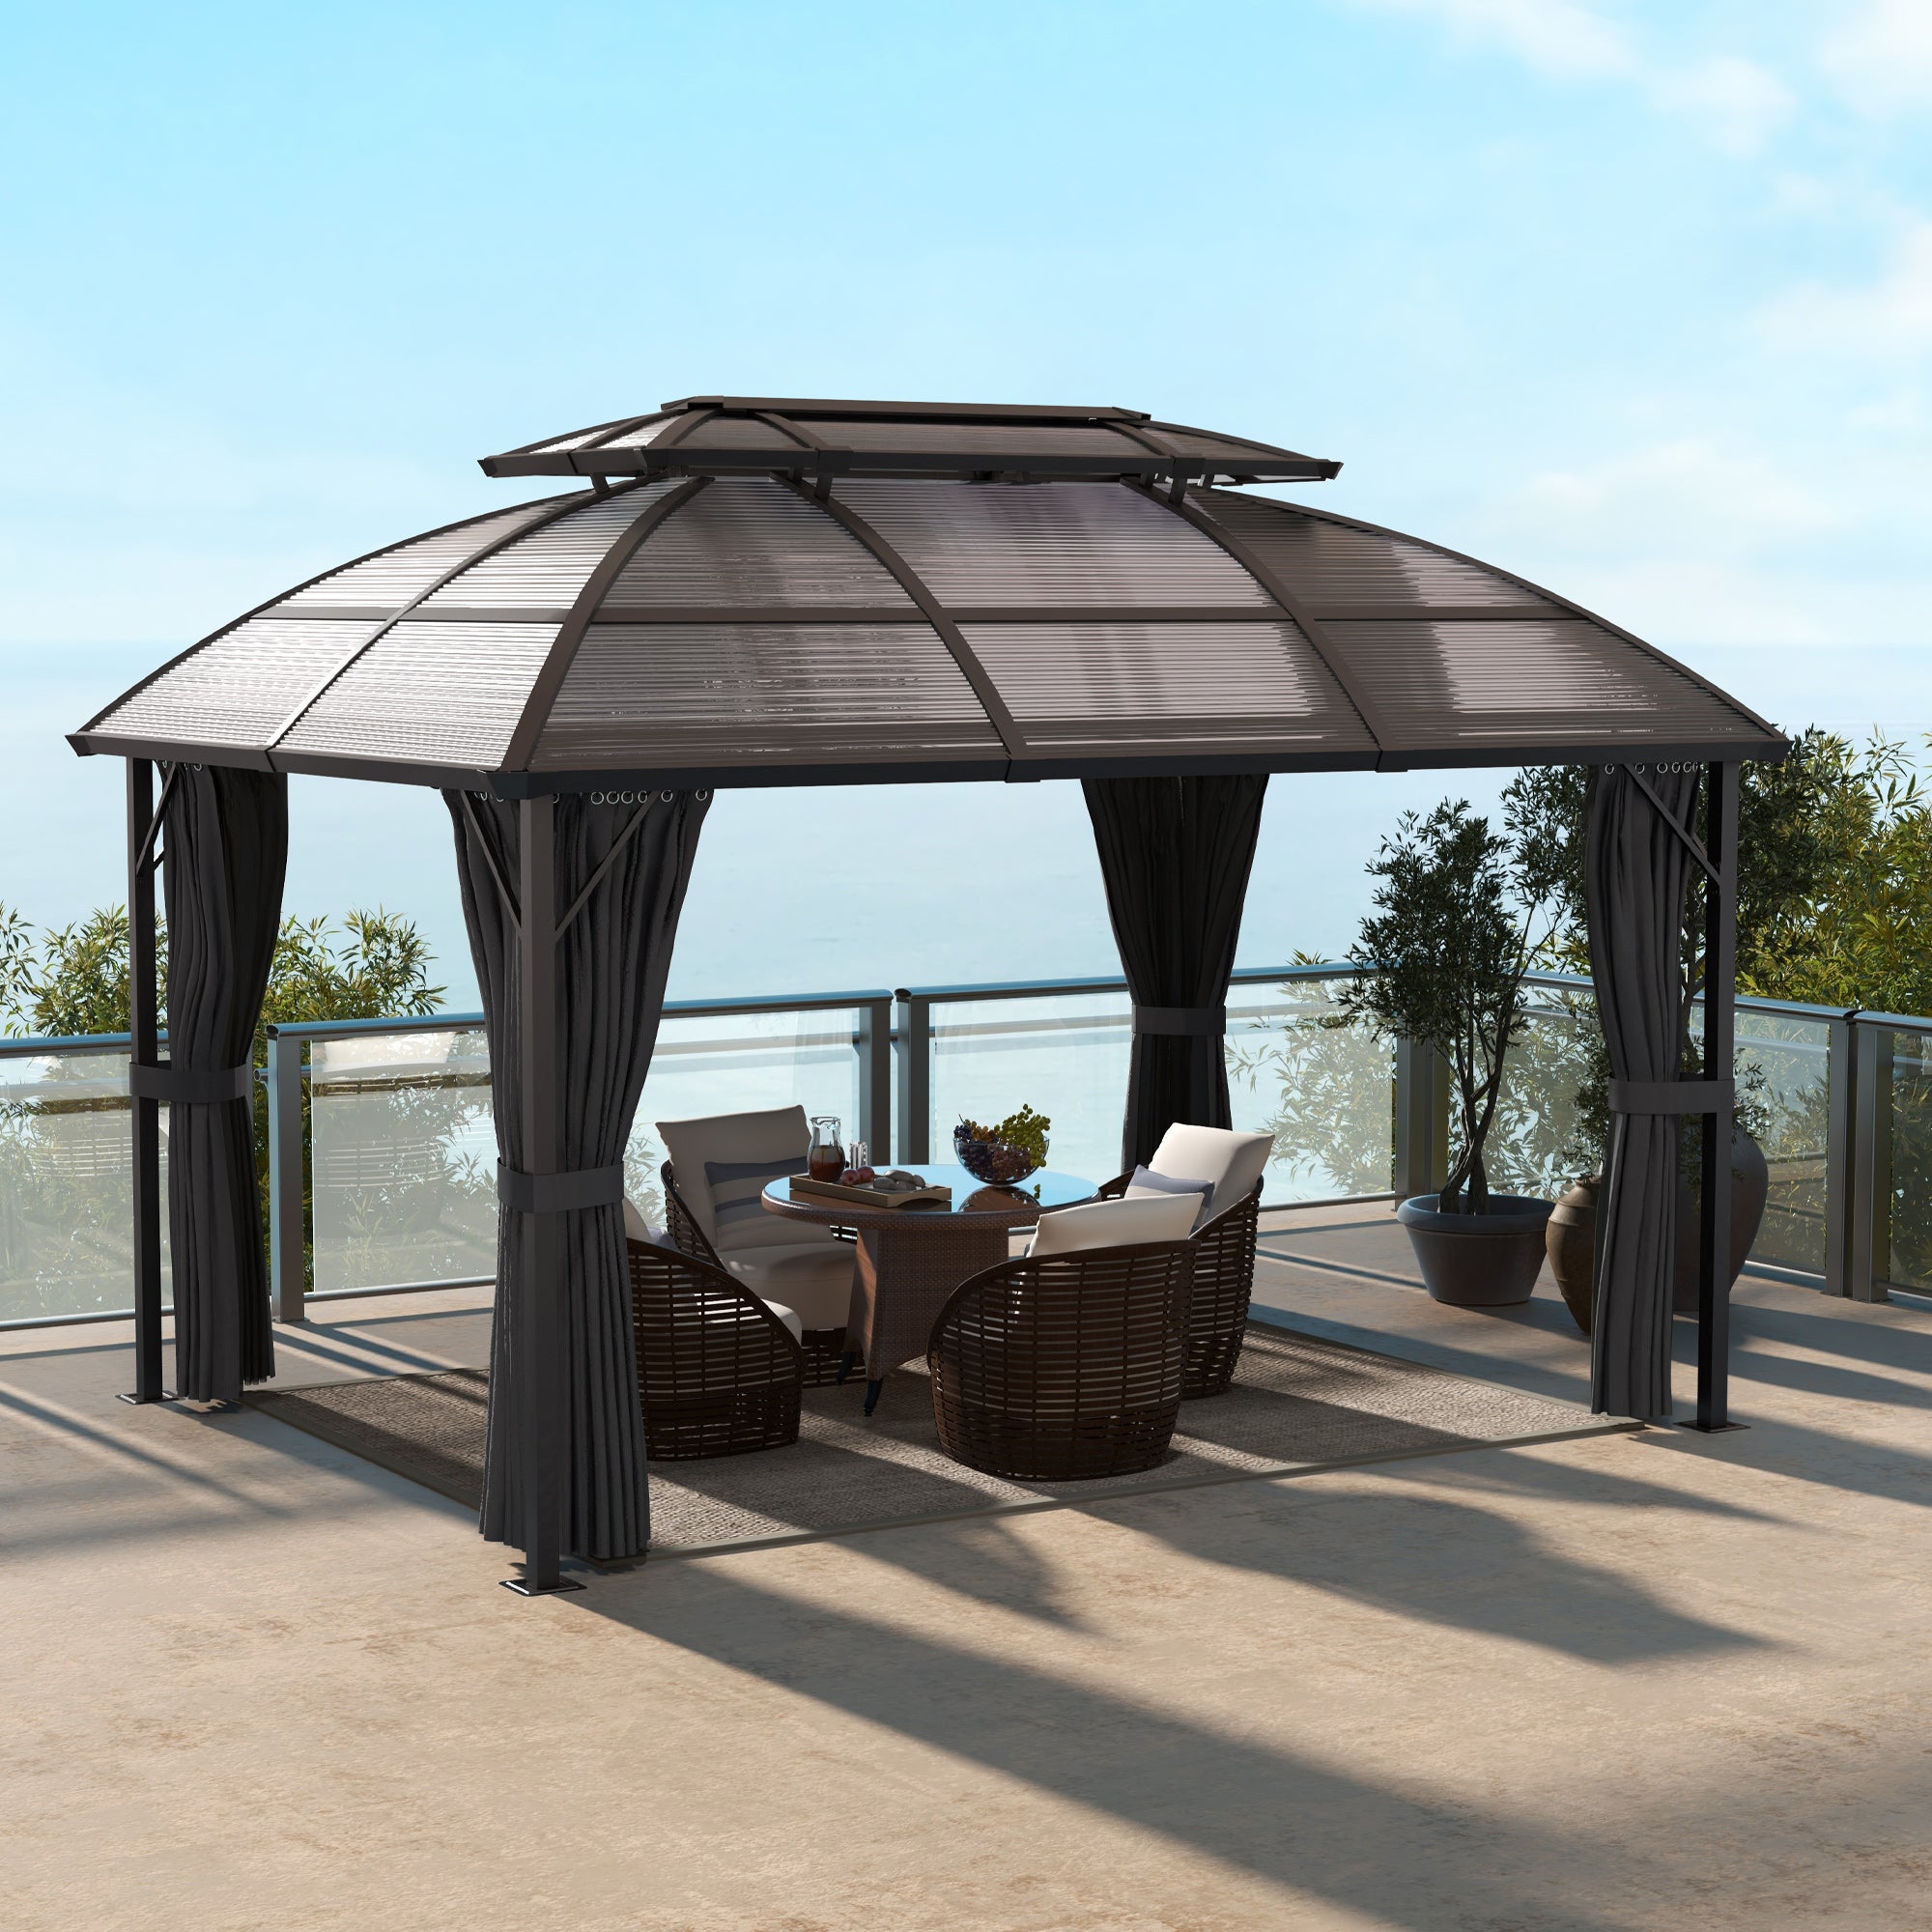 Aluminium Frame 4 x 3(m) Polycarbonate Gazebo with Curtains, Nettings, Double Roof for Lawn, Yard, Patio, Deck, Brown - Gazebo Store